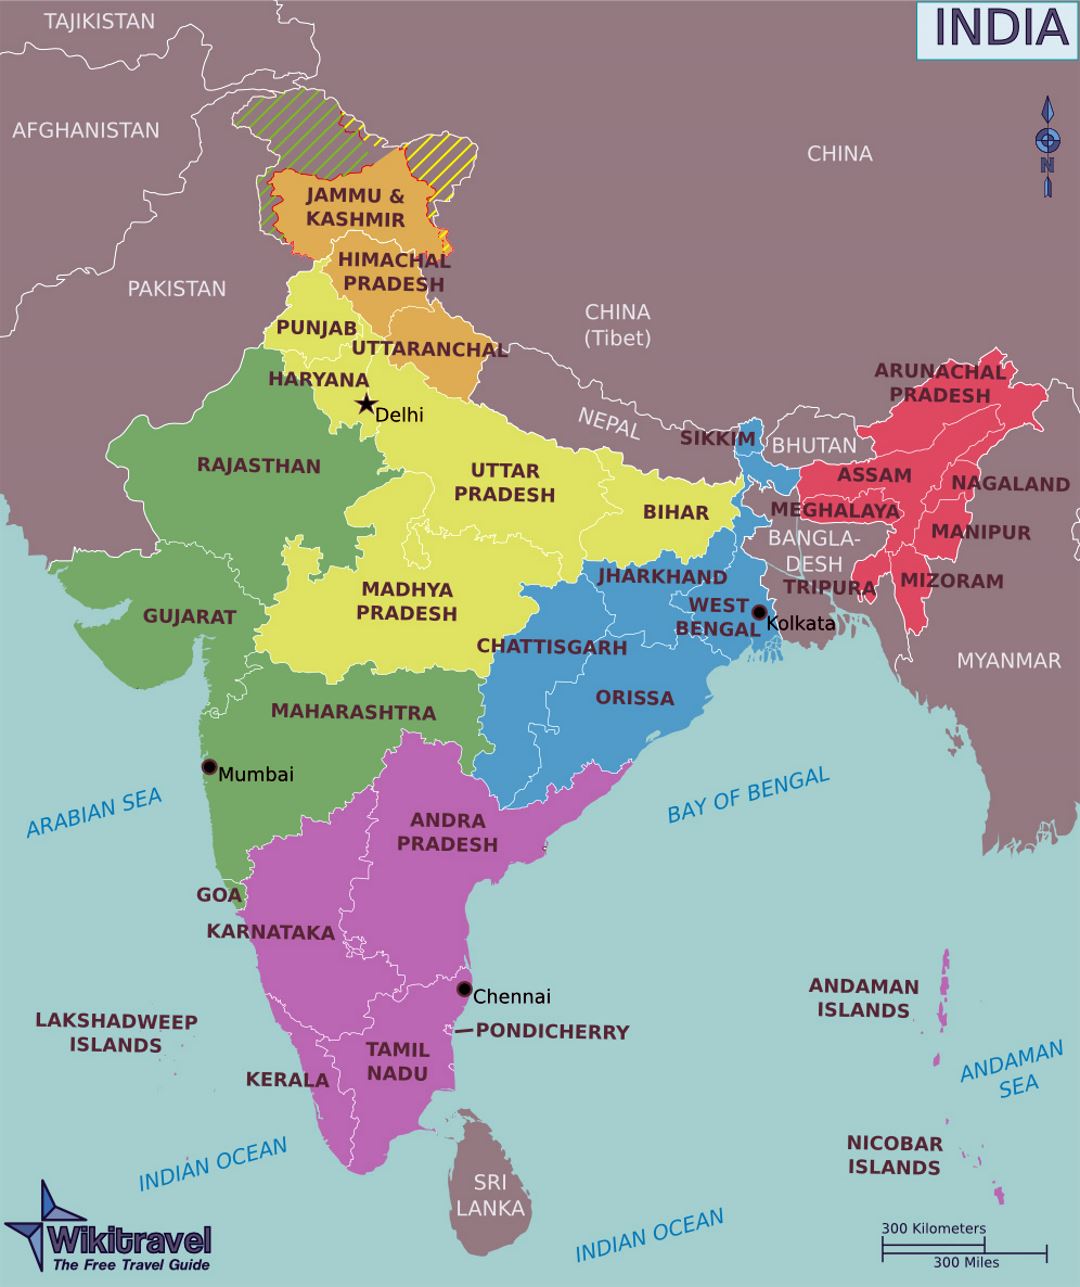 Large regions map of India